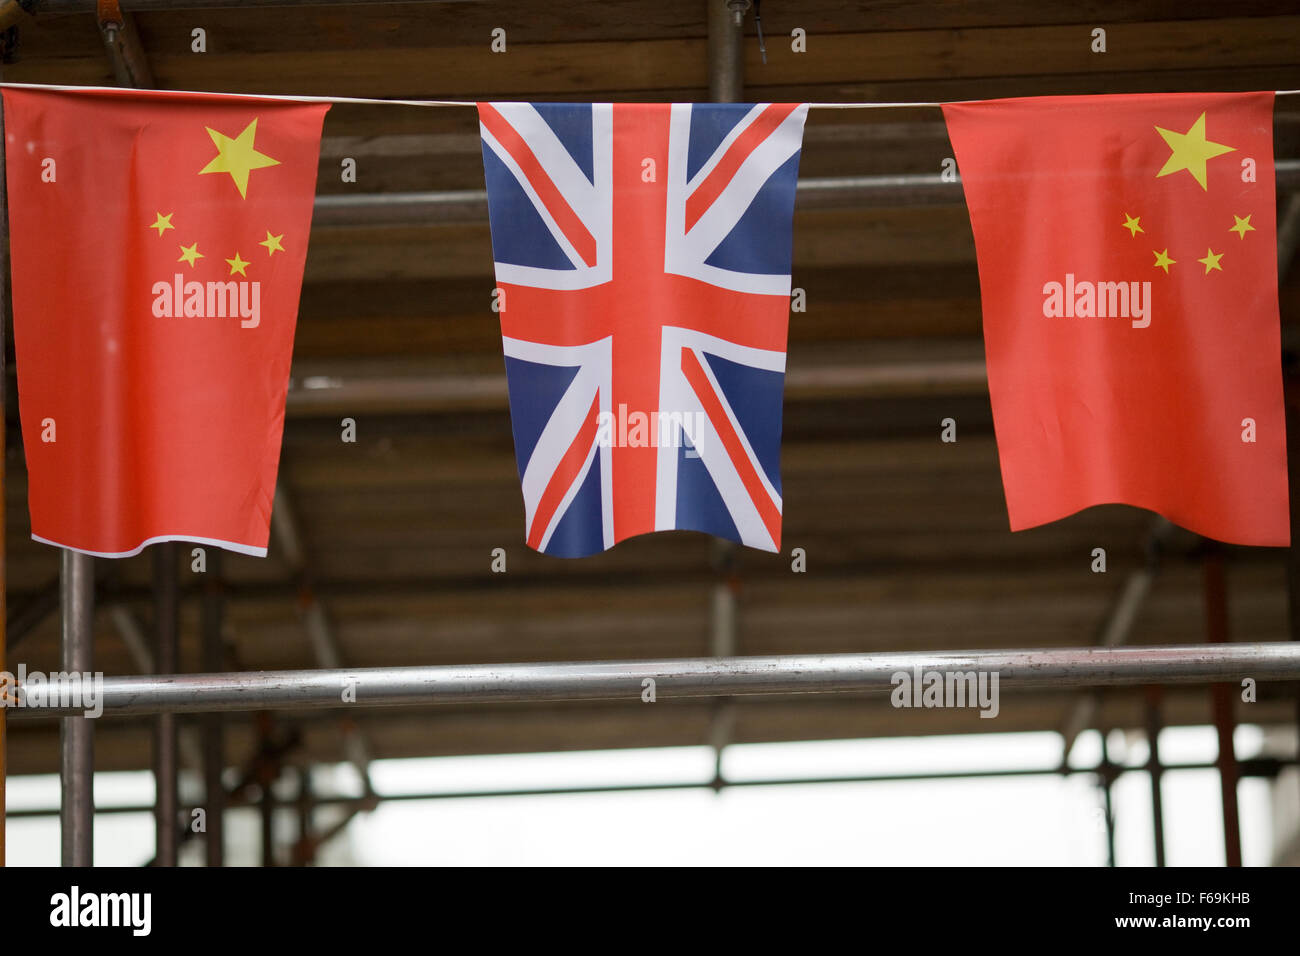 Union Jack bunting and Chinese flag bunting hanging in China Town London Stock Photo